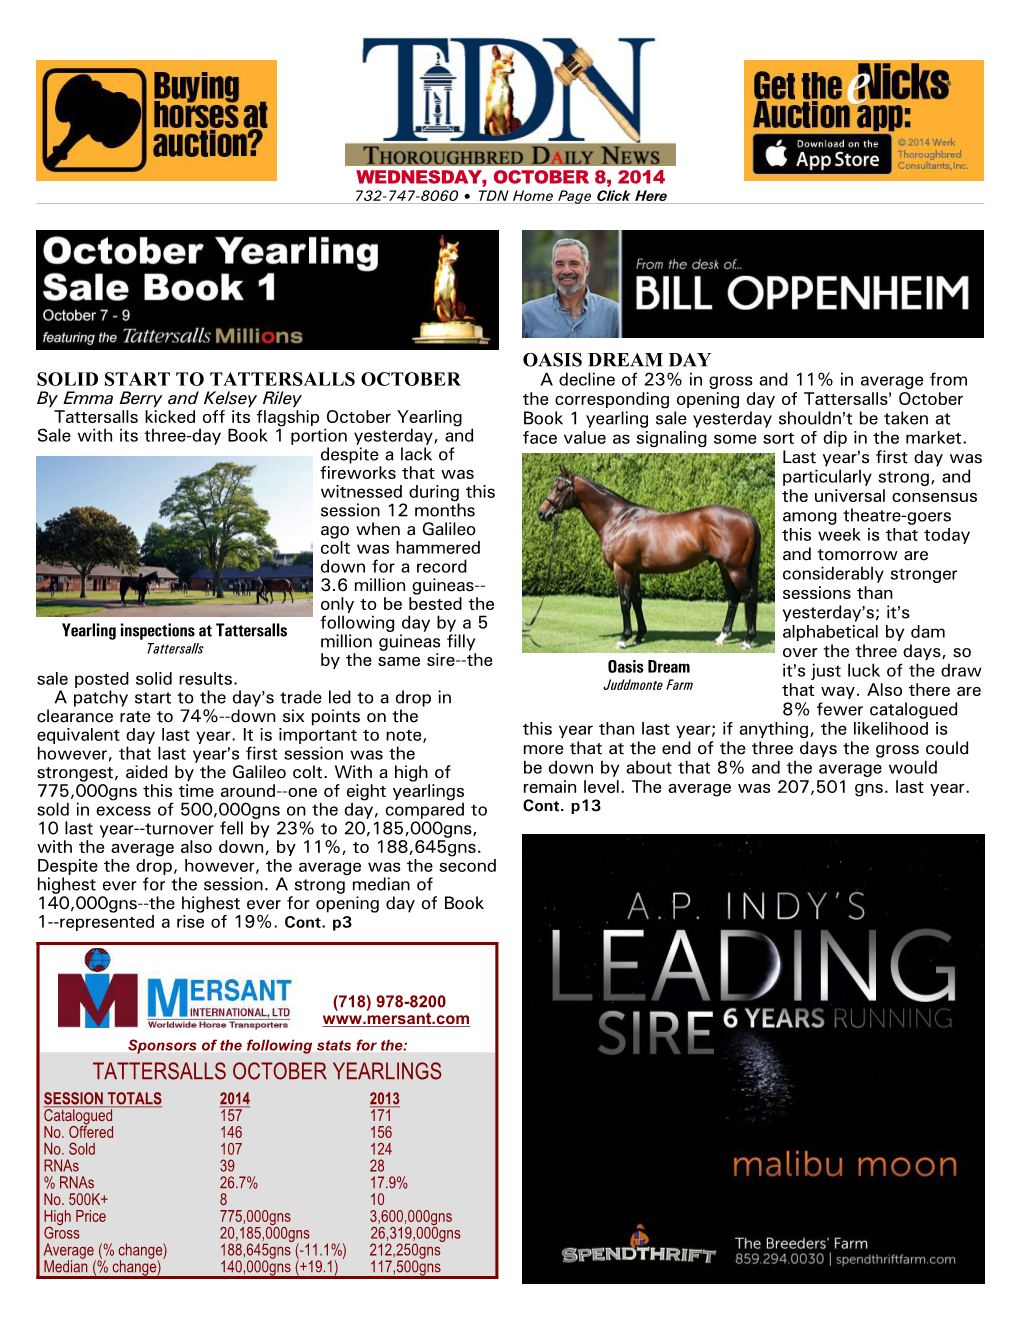 TATTERSALLS OCTOBER YEARLINGS SESSION TOTALS 2014 2013 Catalogued 157 171 No